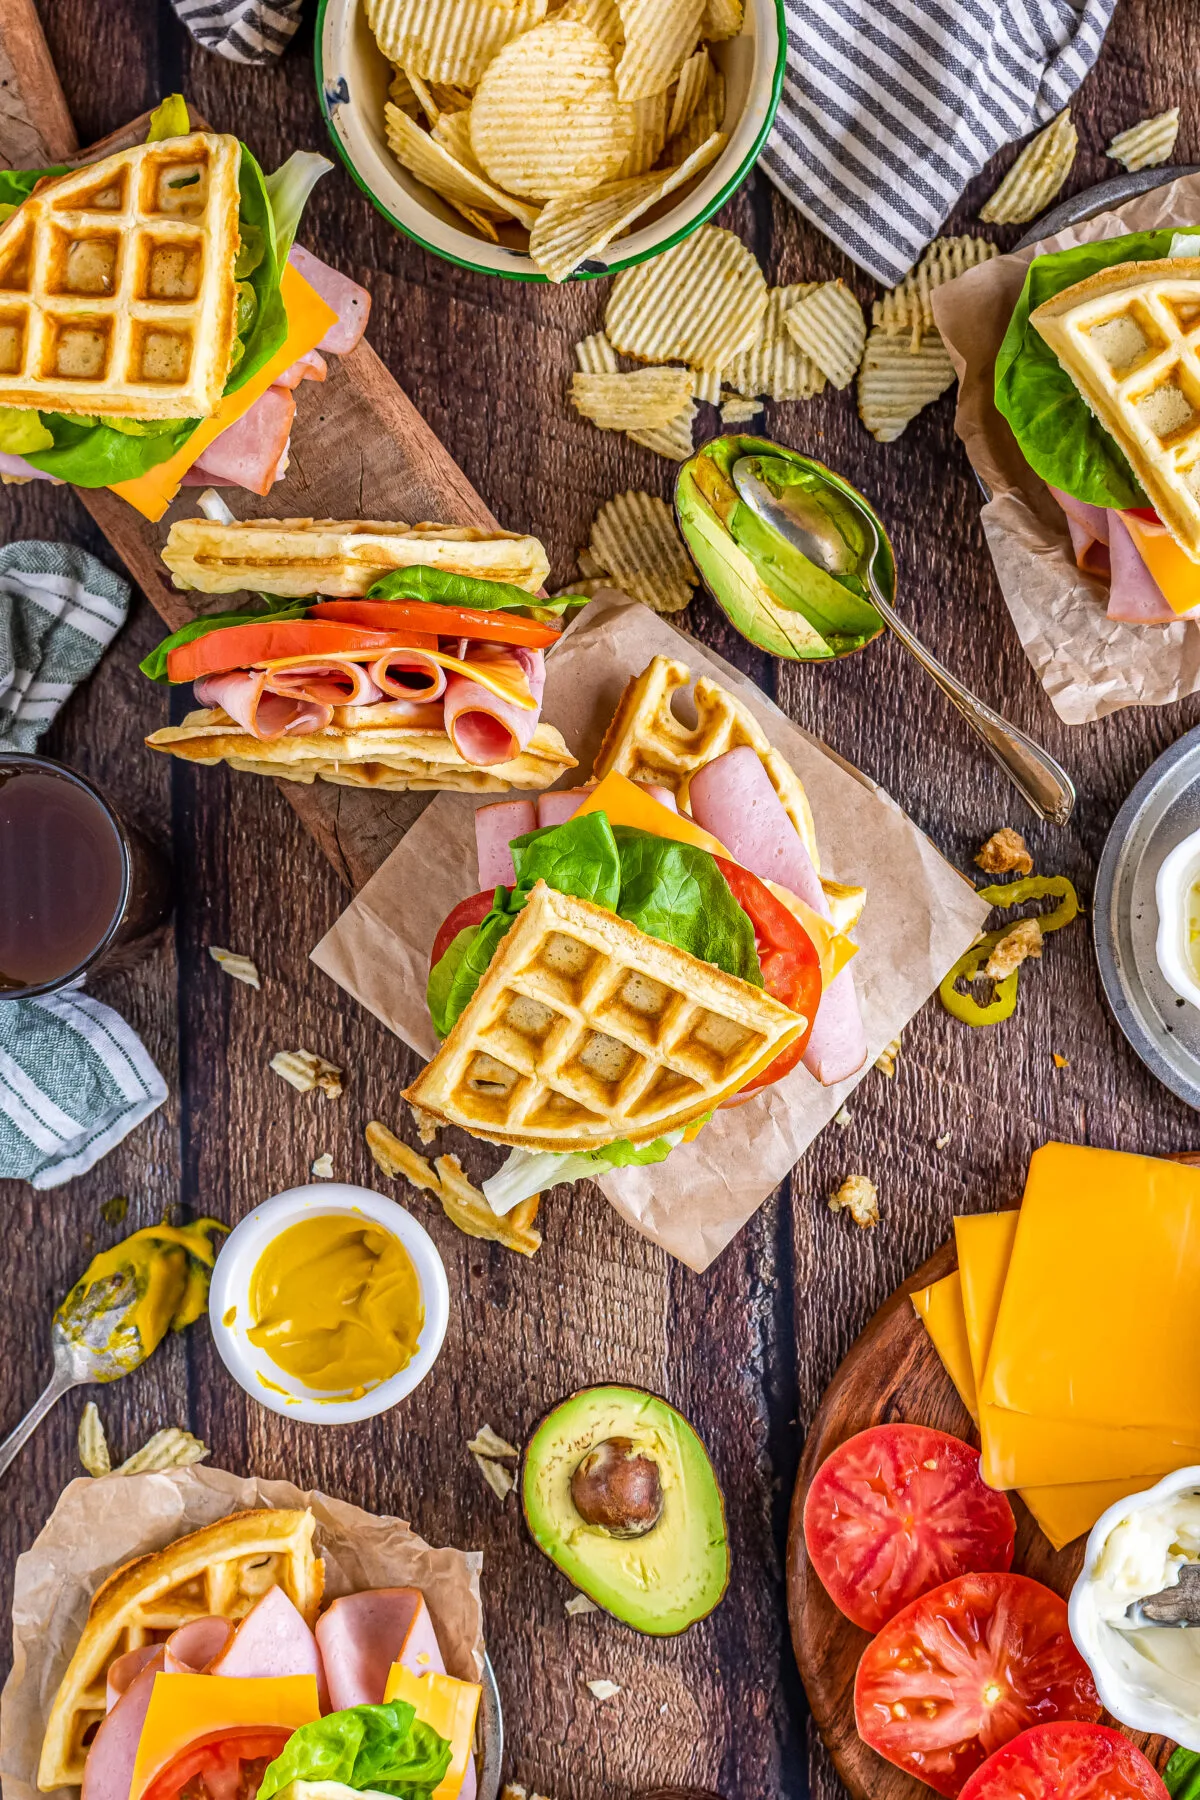 Upgrade your lunch with these ham and cheese waffle sandwiches featuring fluffy homemade waffles with perfectly crisp edges.